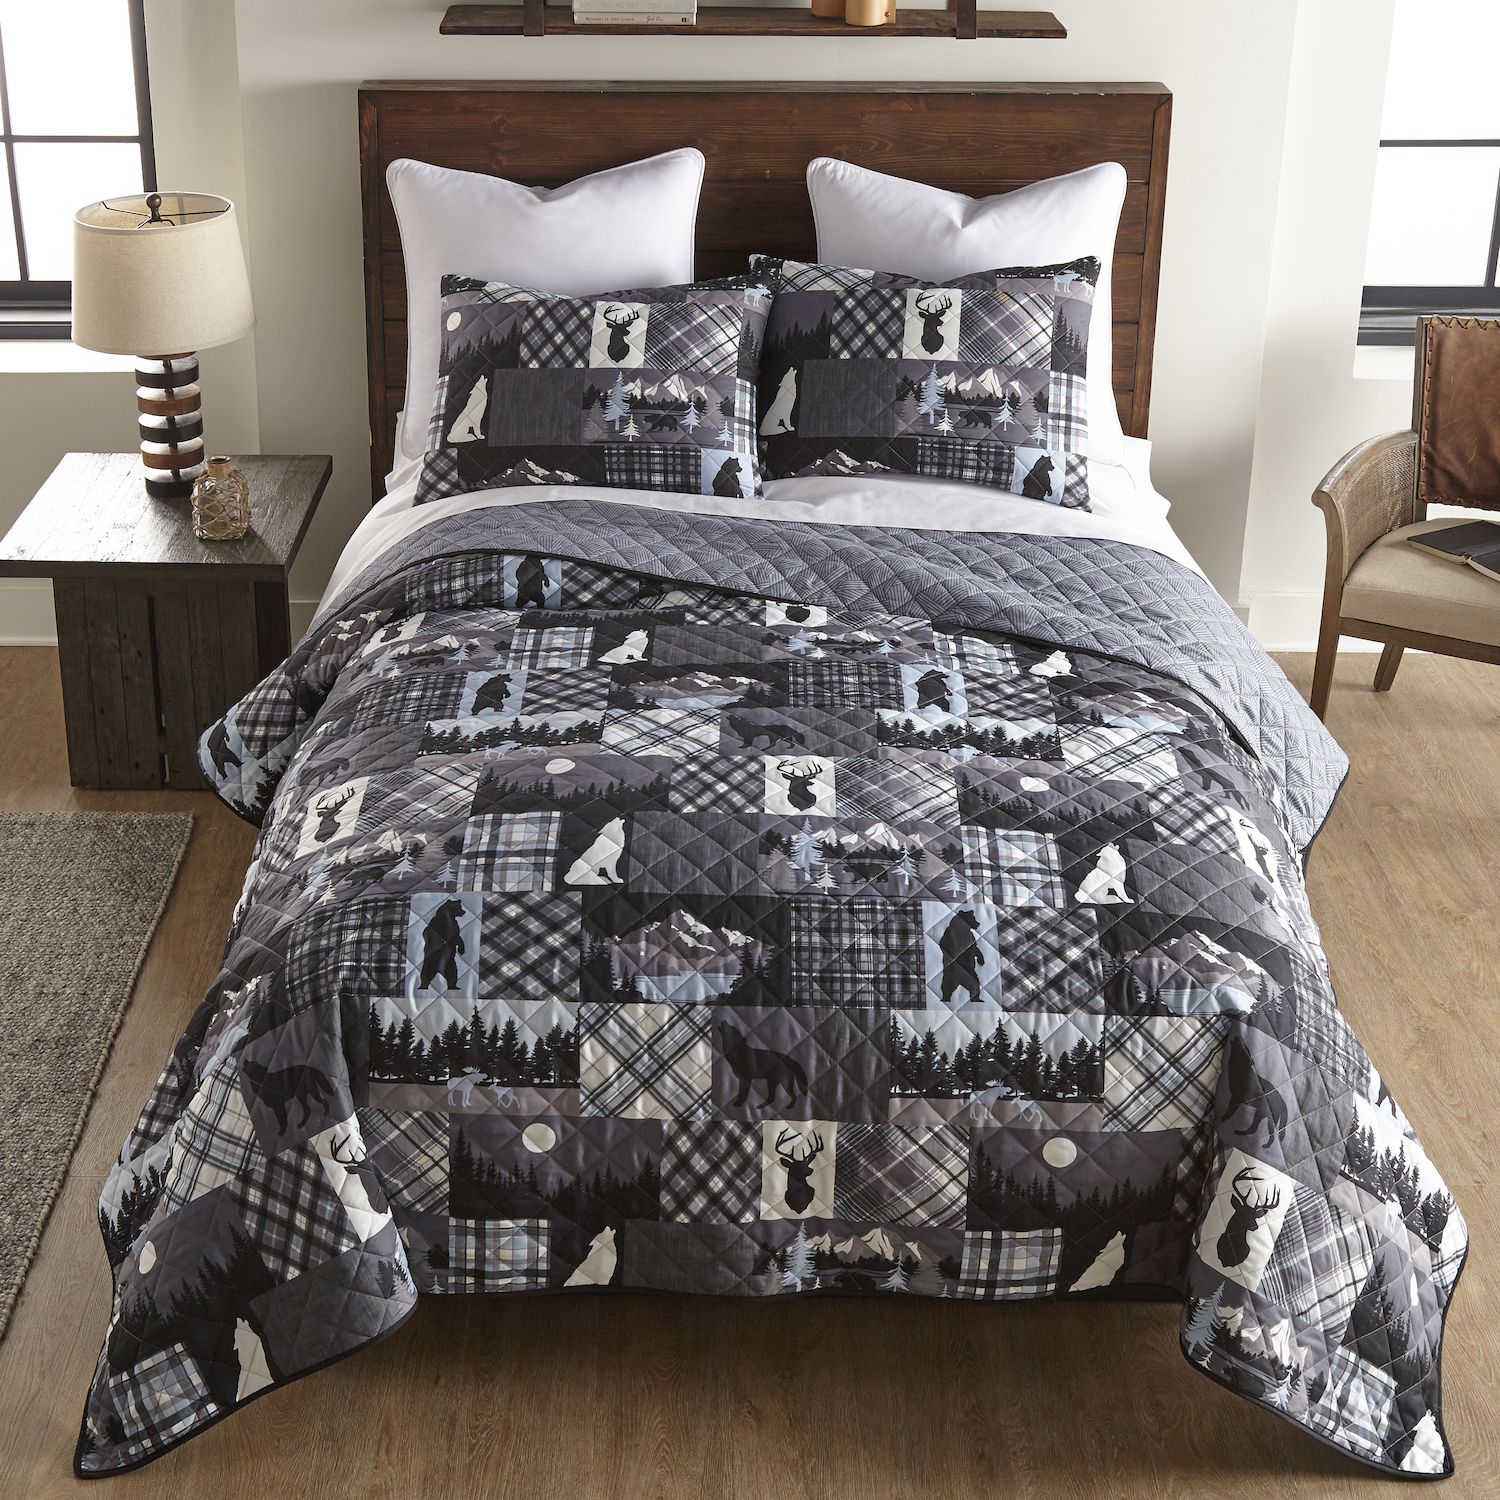 Image for Donna Sharp Nightly Walk Quilt Set with Shams at Kohl's.